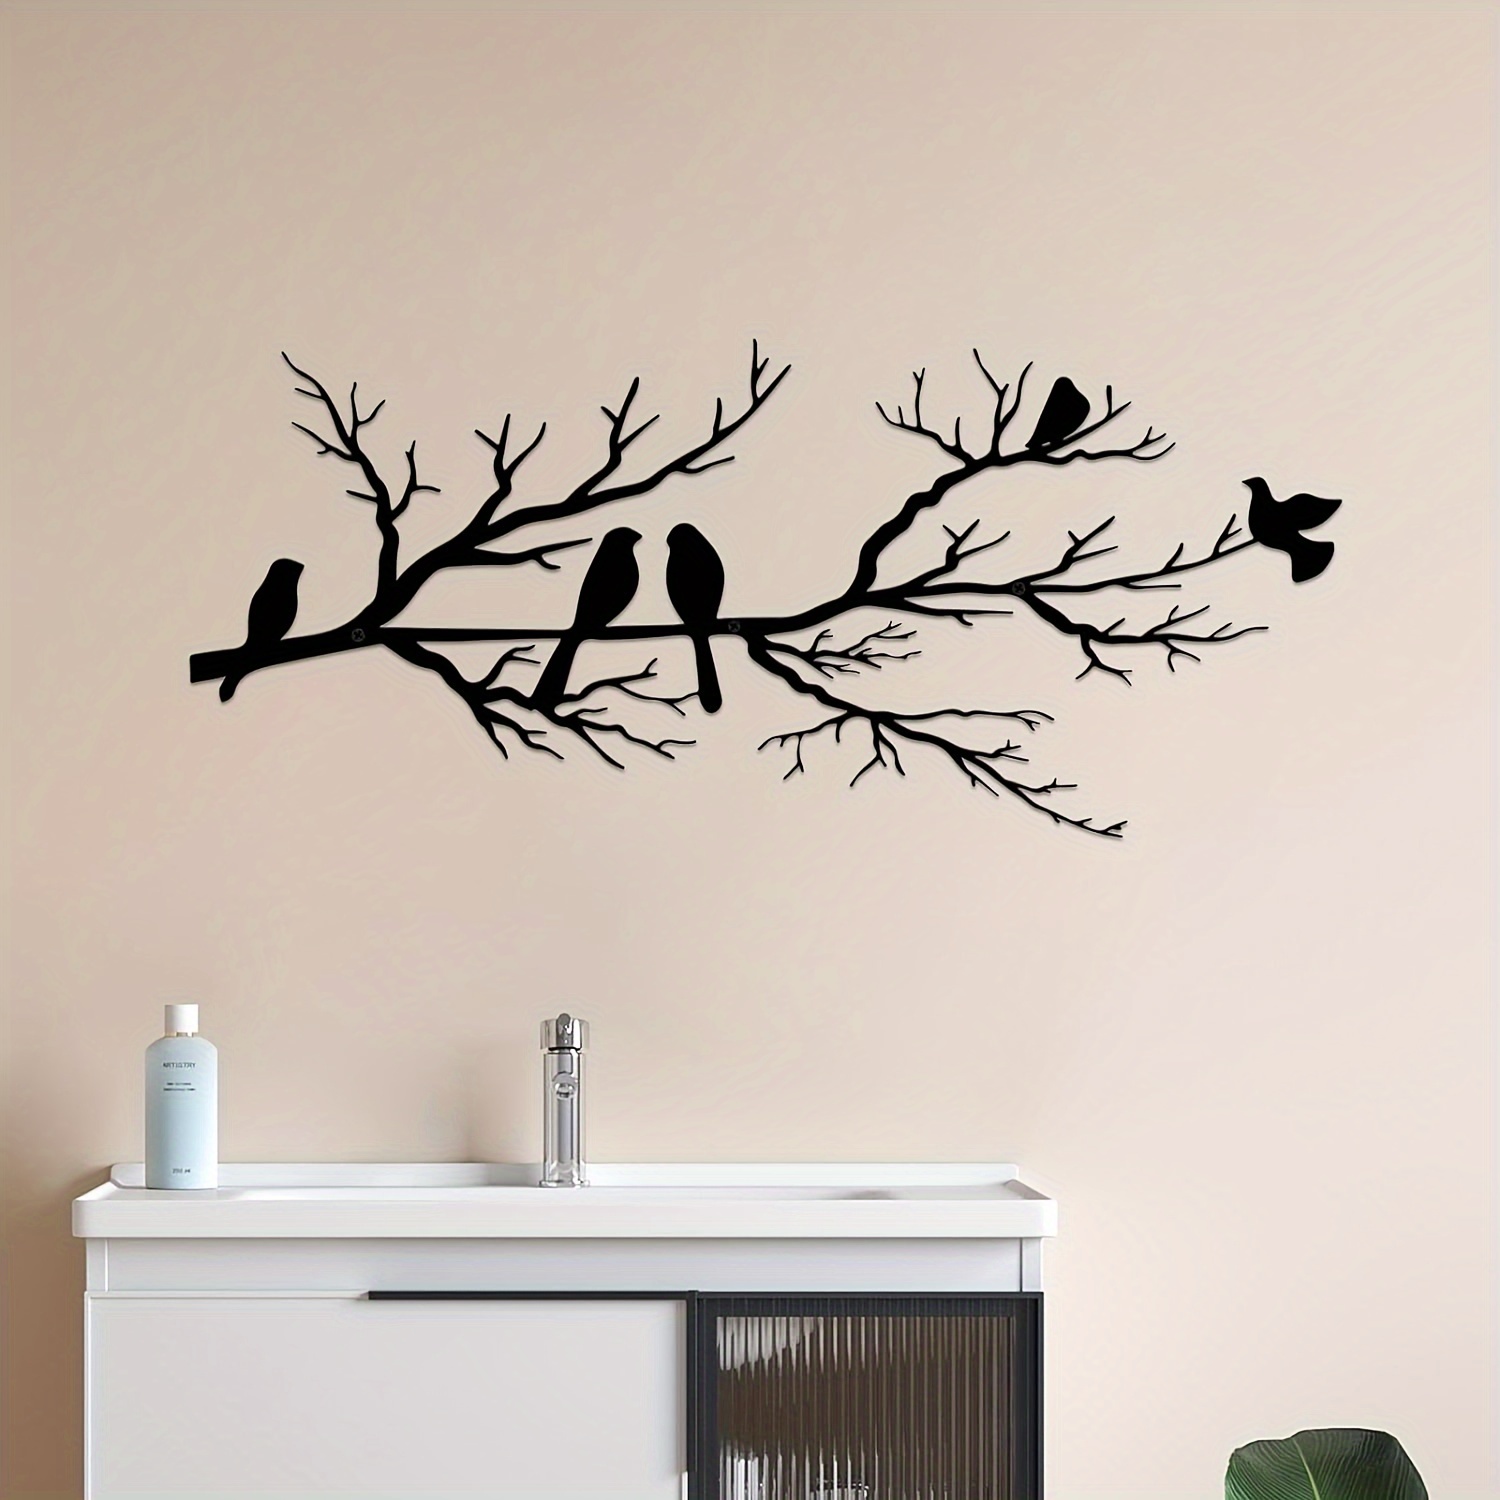 

1pc, Rustic Style Metal Birds On Branch Wall Art, Black Silhouette Leaves With Bird, Outdoor Hanging Wall Sculpture For Home, Balcony & Garden Decor